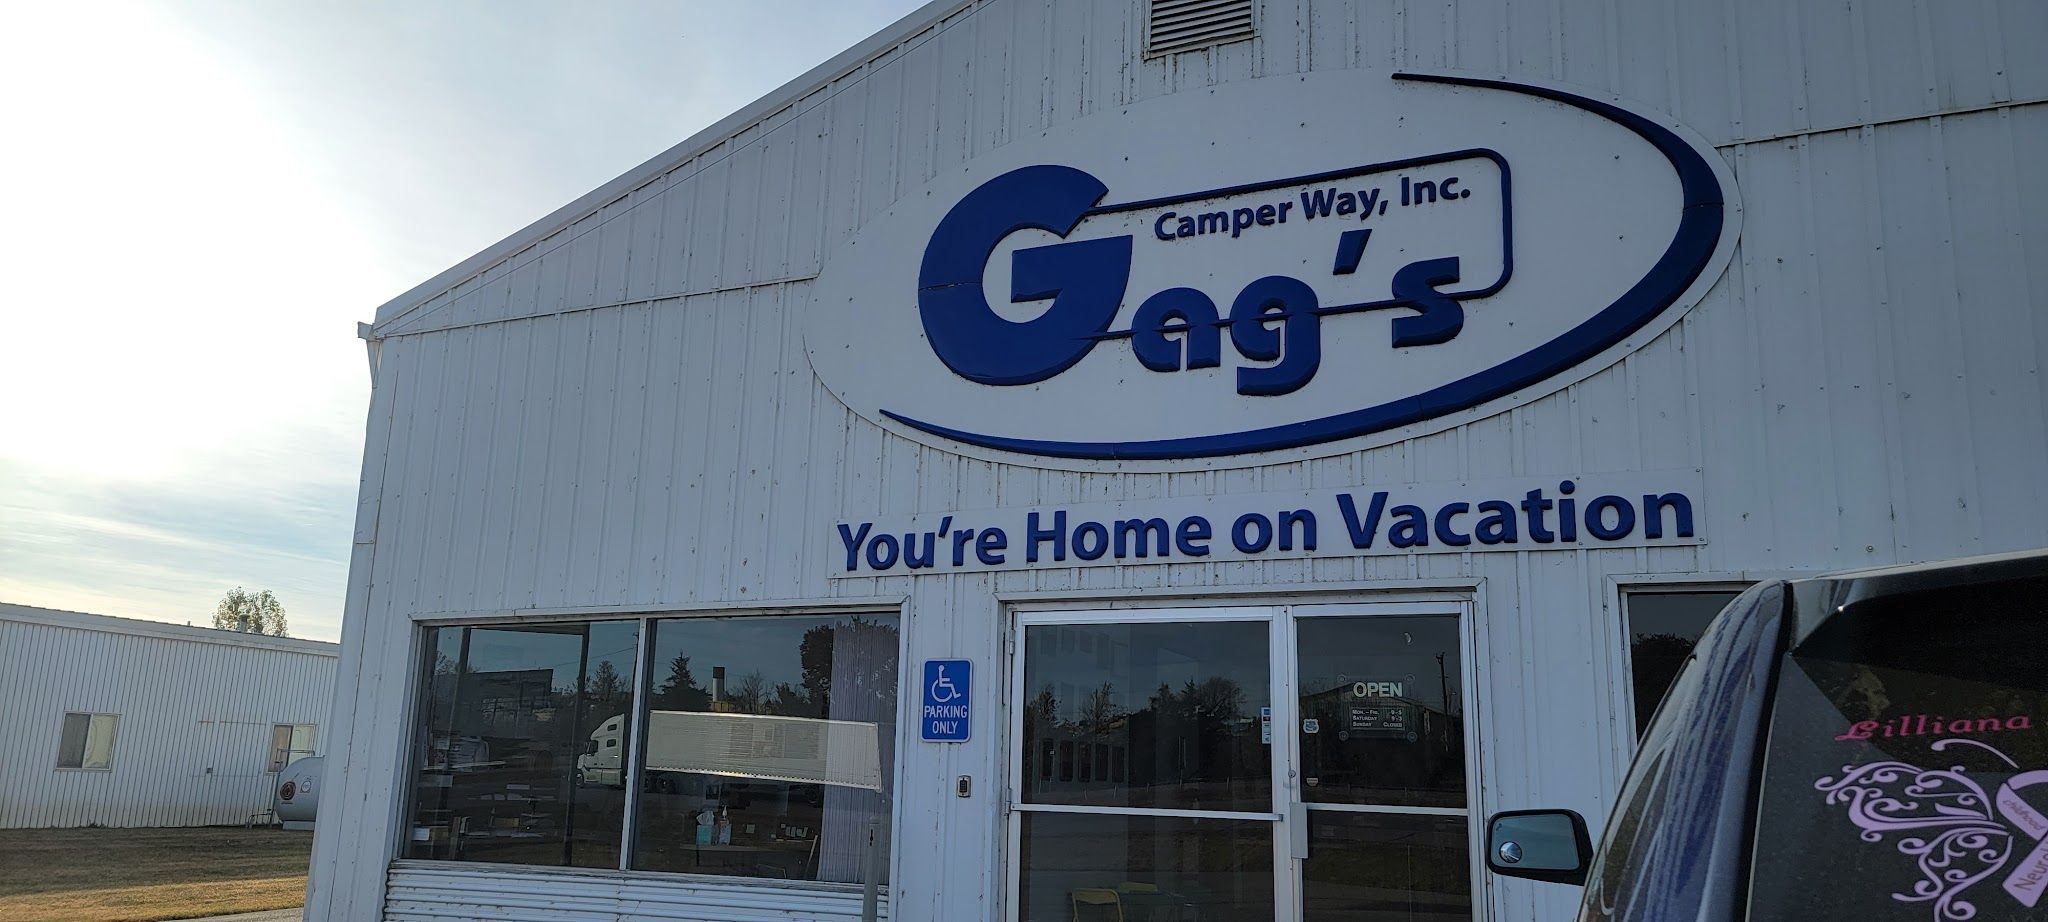 Services & Products Gag's Camper Way in Mankato MN